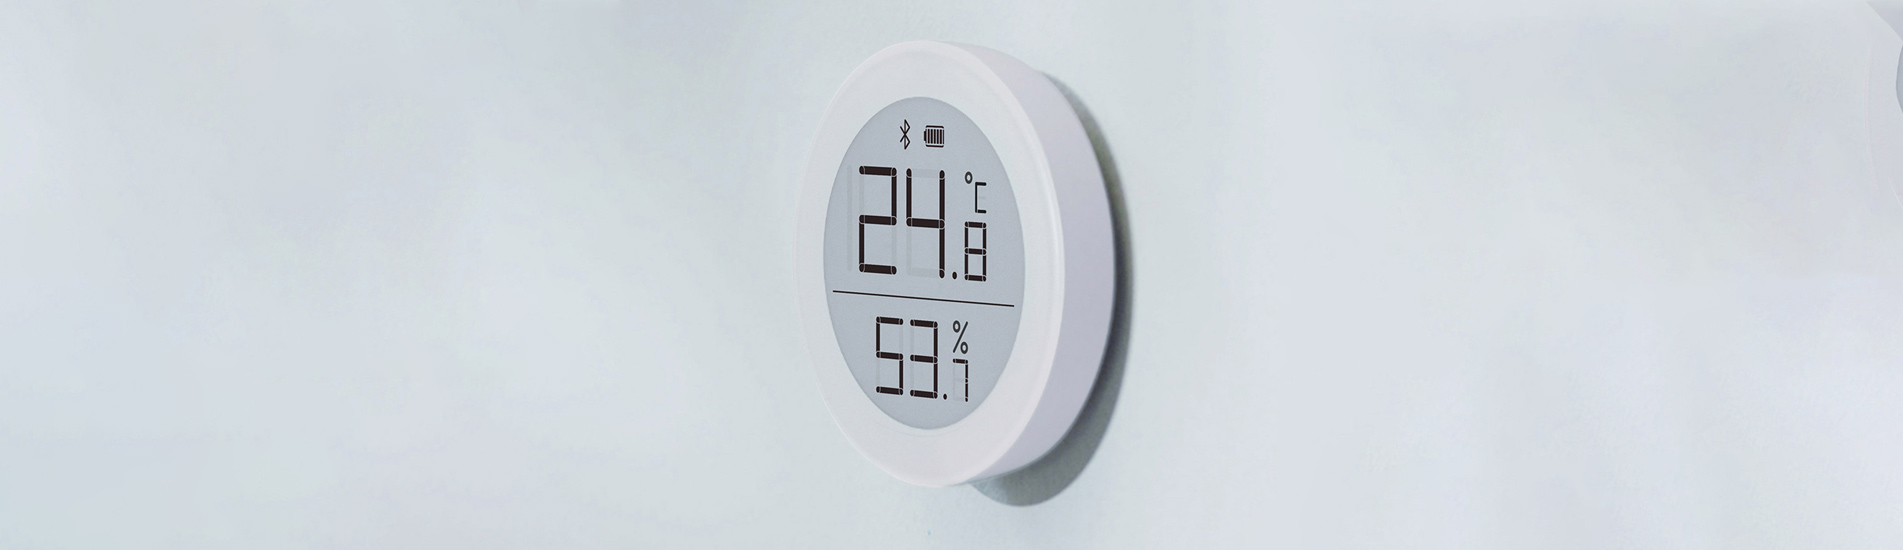 Xiaomi thermometer and hygrometer